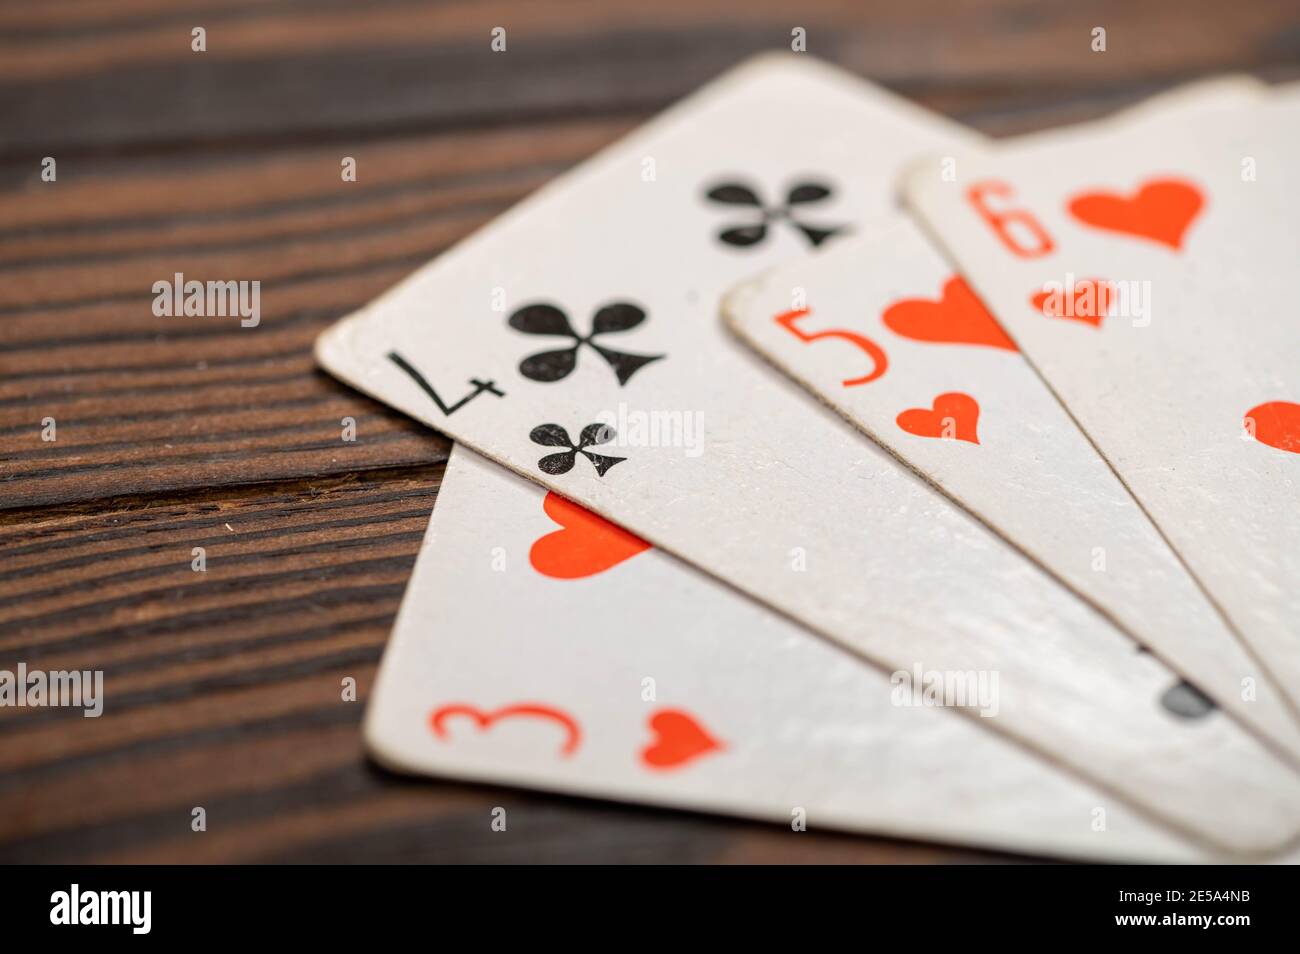 Playing cards on a wooden table. Close-up, selective focus. Stock Photo